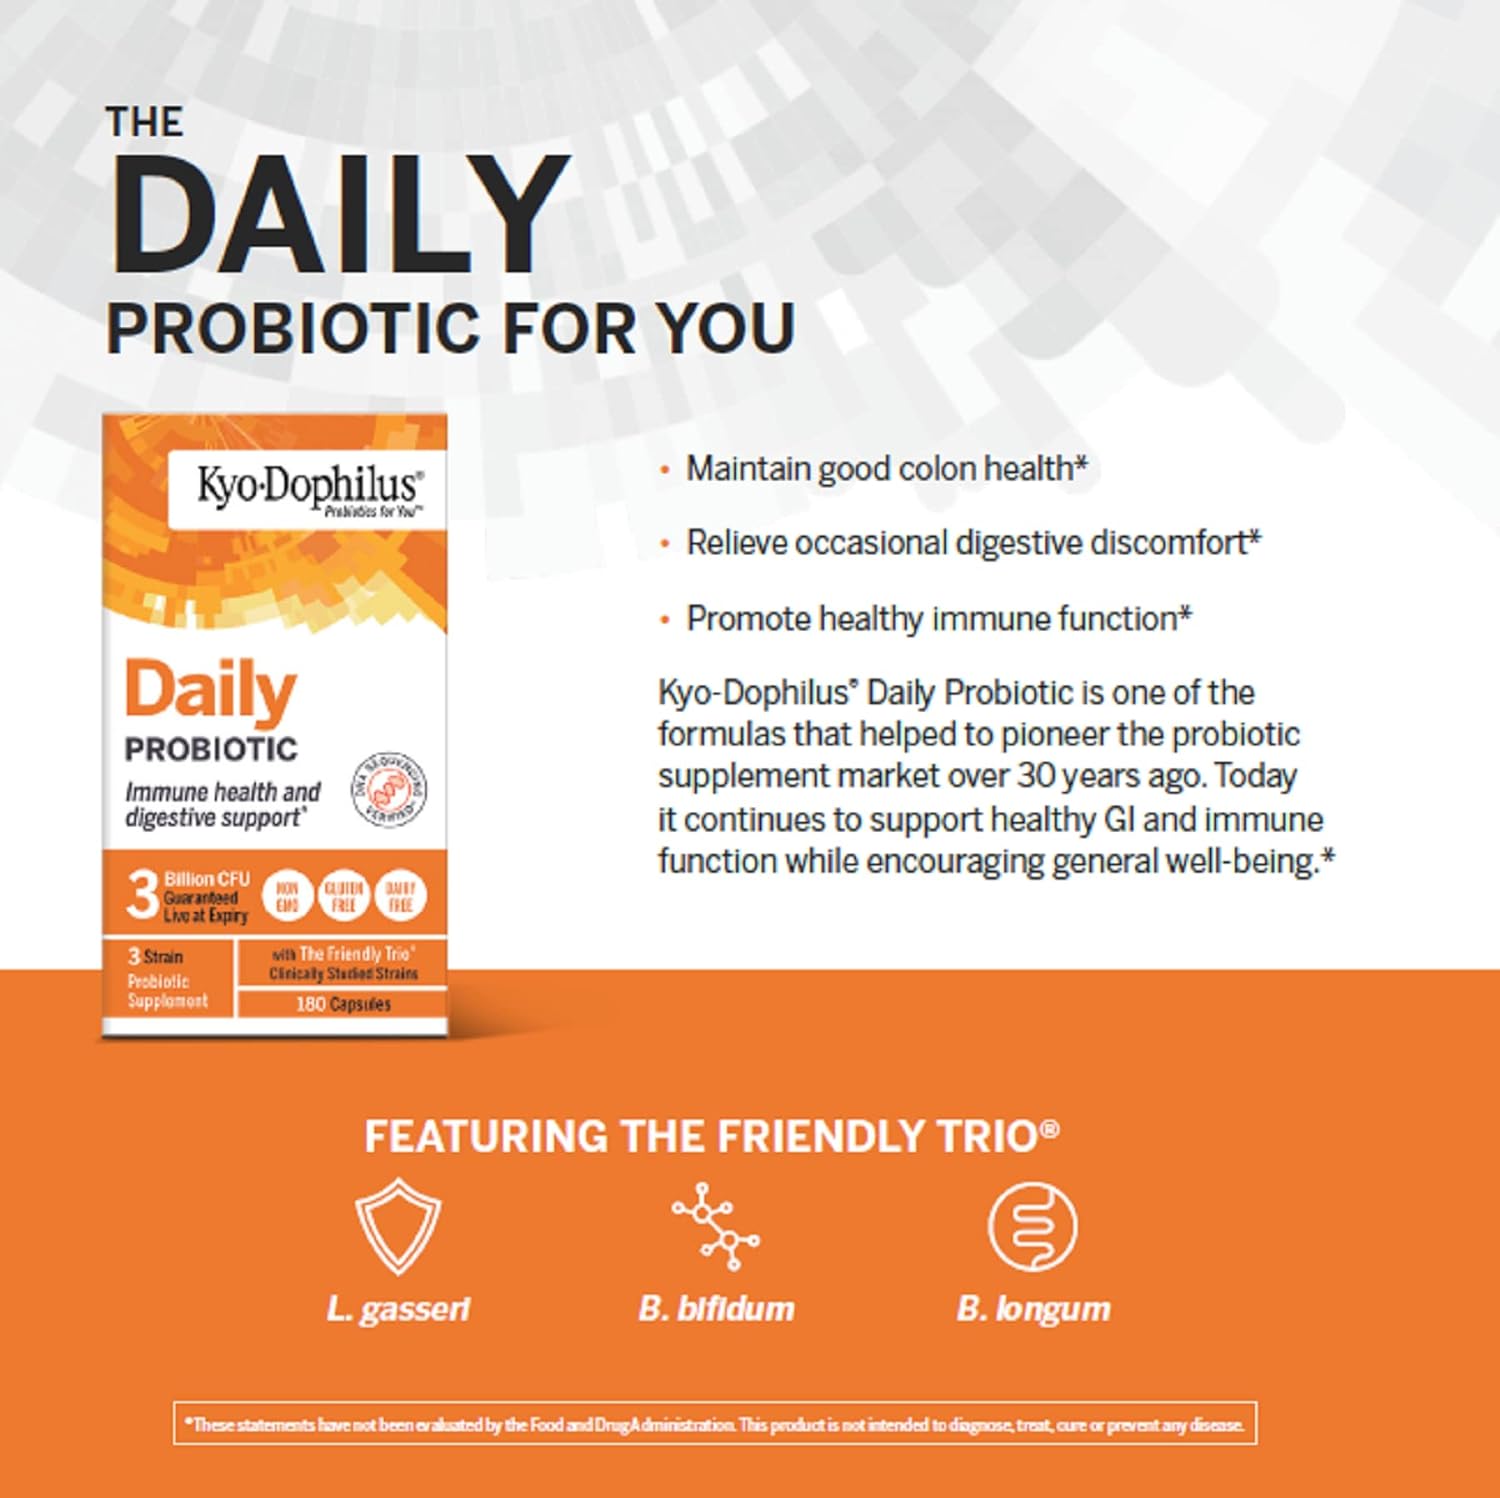 Kyo-Dophilus Daily Probiotic, Immune and Digestive Support*, 90 capsul